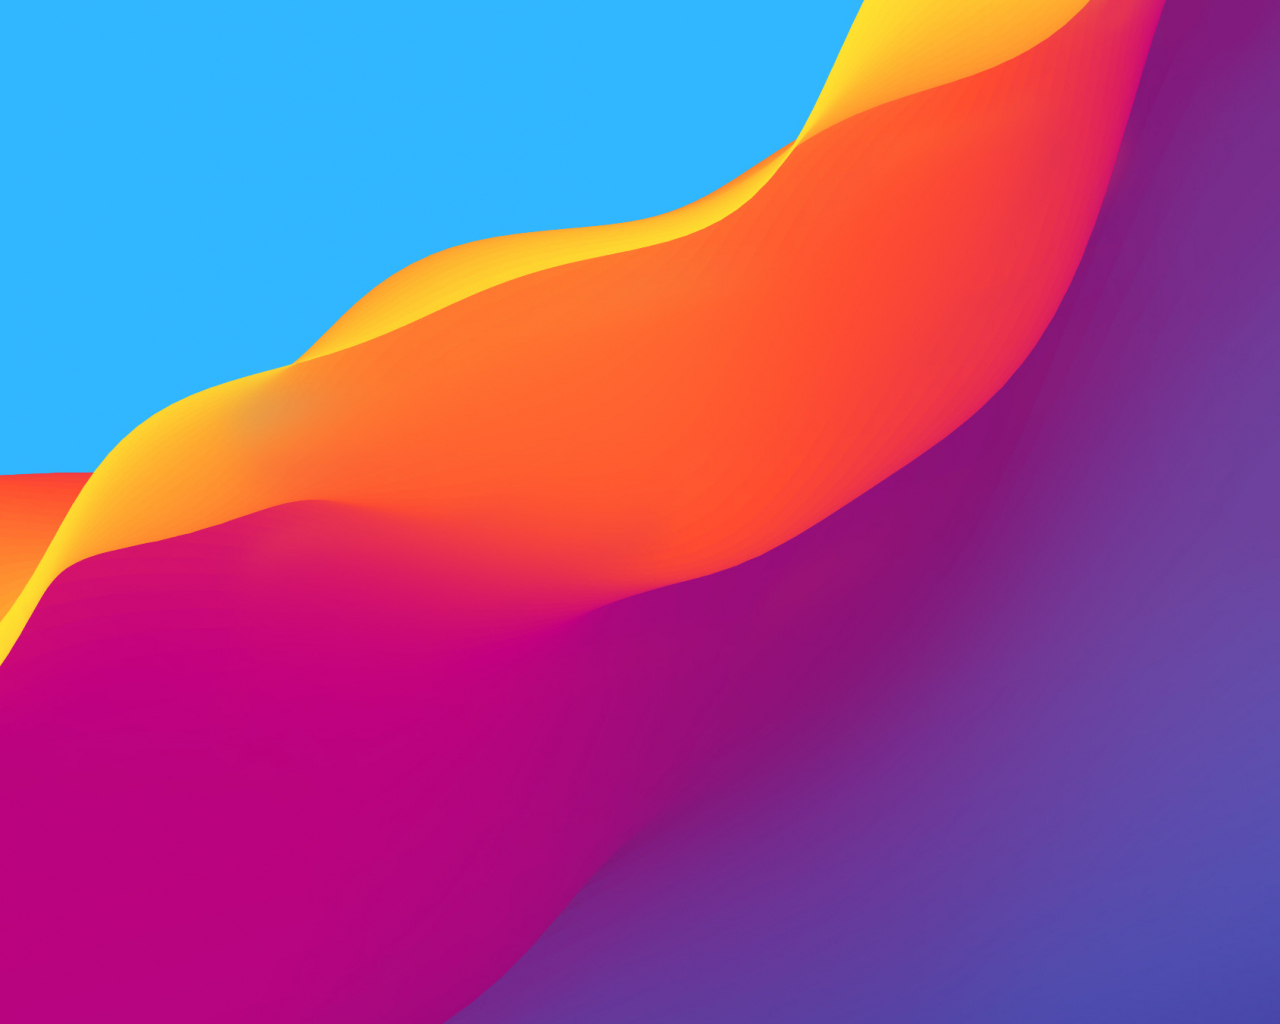 Download 1280x1024 Wallpaper Flow, Colorful Waves, Abstract, Standard 5:4,  Fullscreen, 1280x1024 Hd Image, Background, 28524